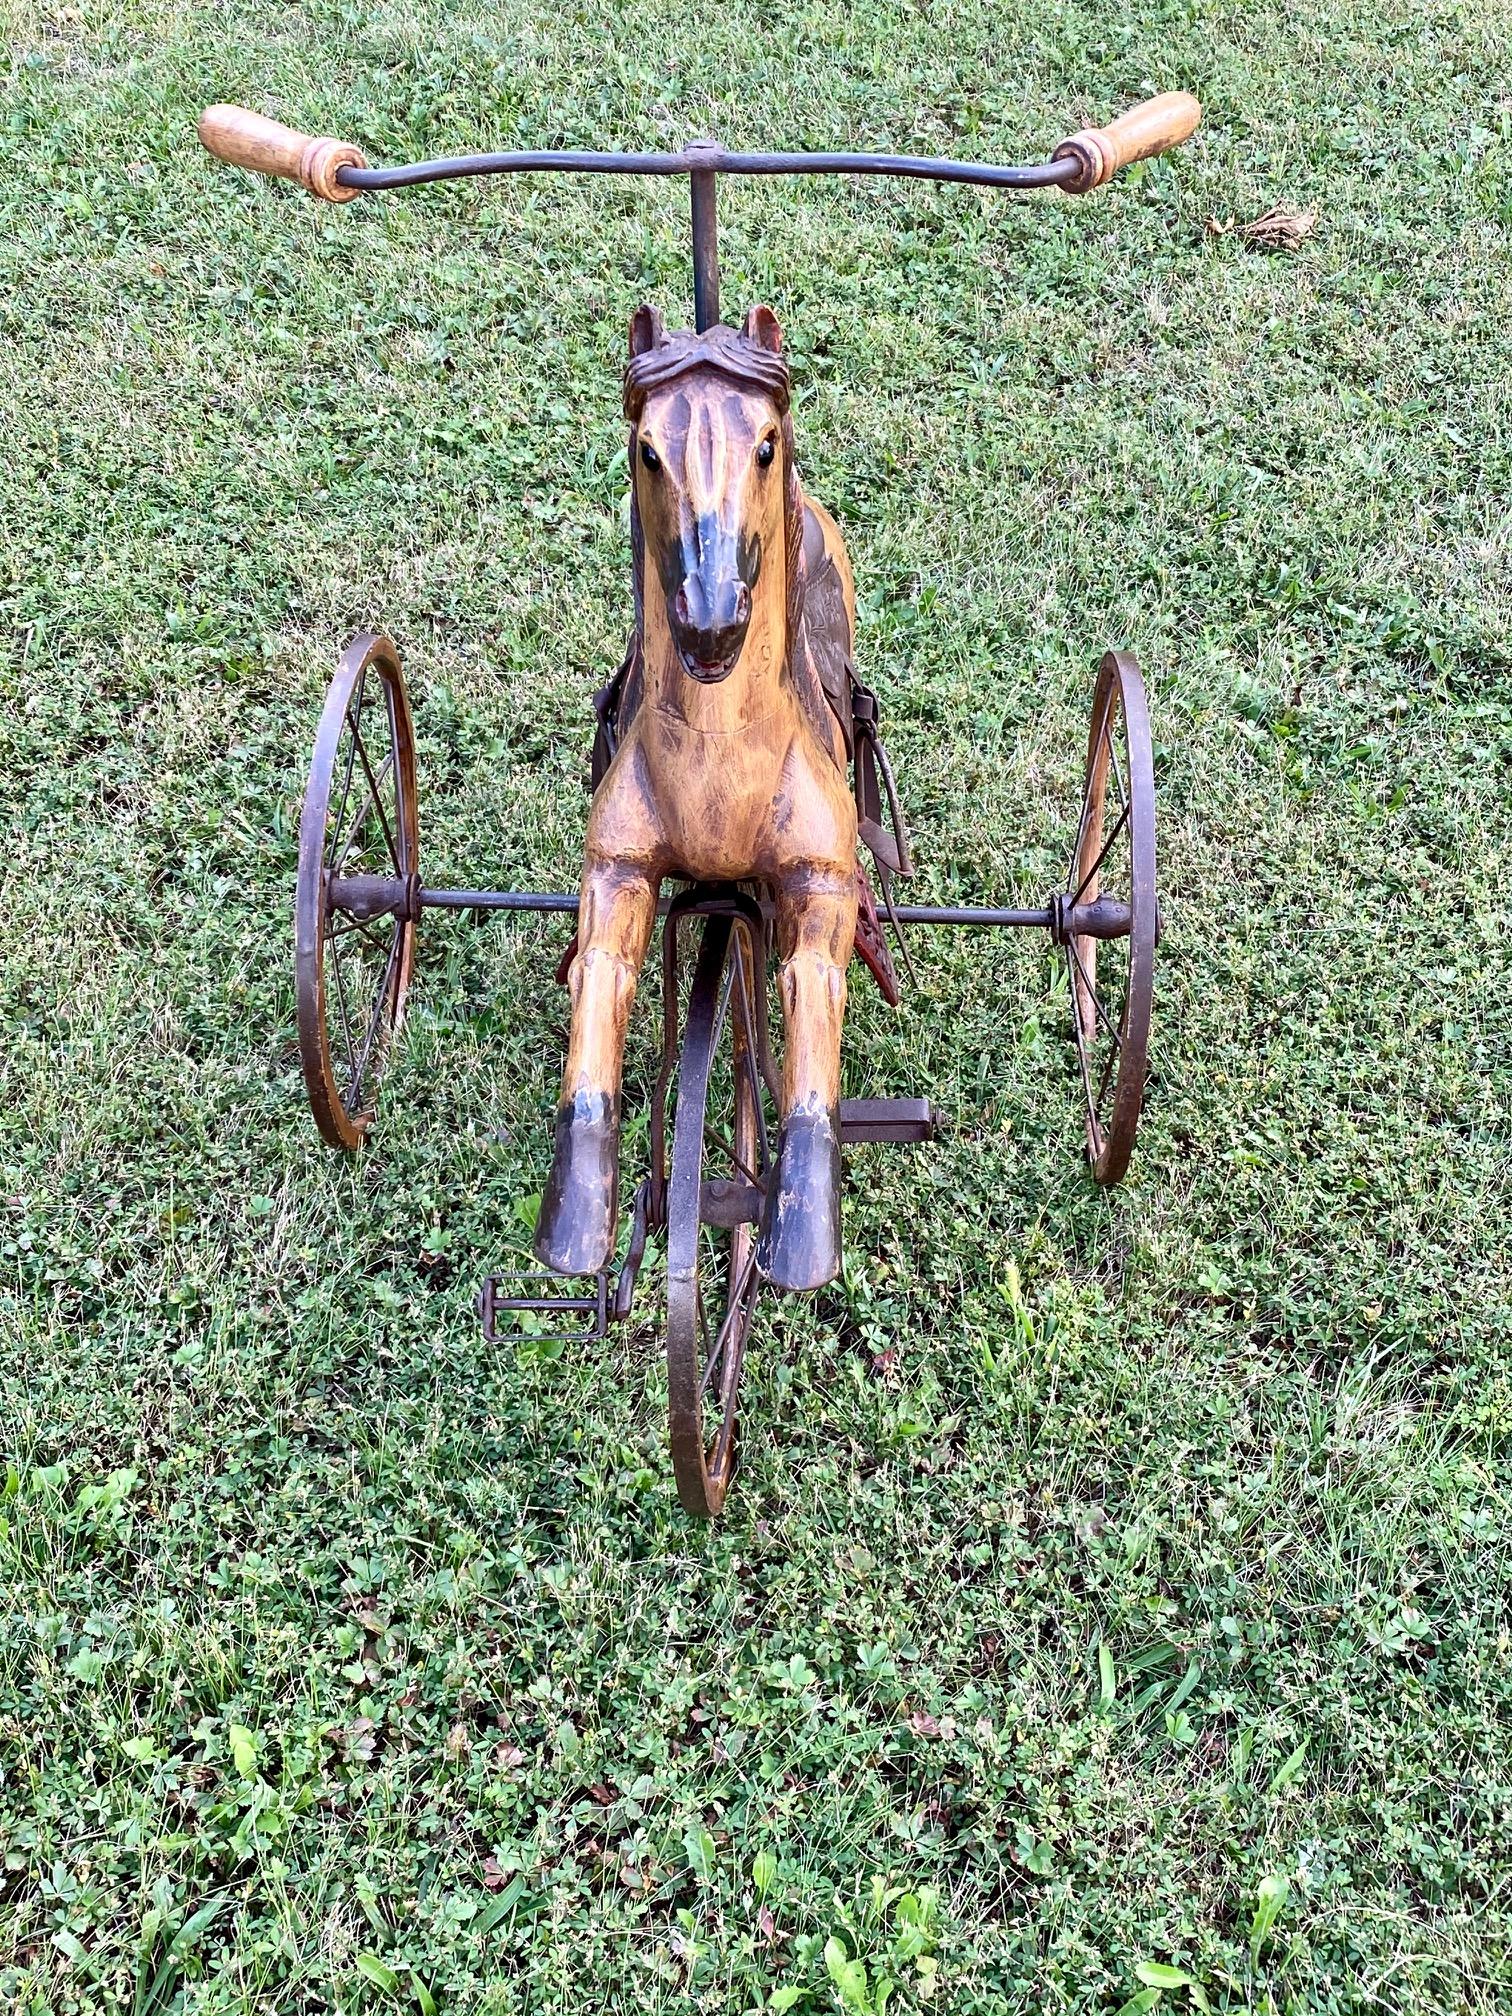 Iron Charming Folk Art Child's Bicycle in the Shape of a Horse